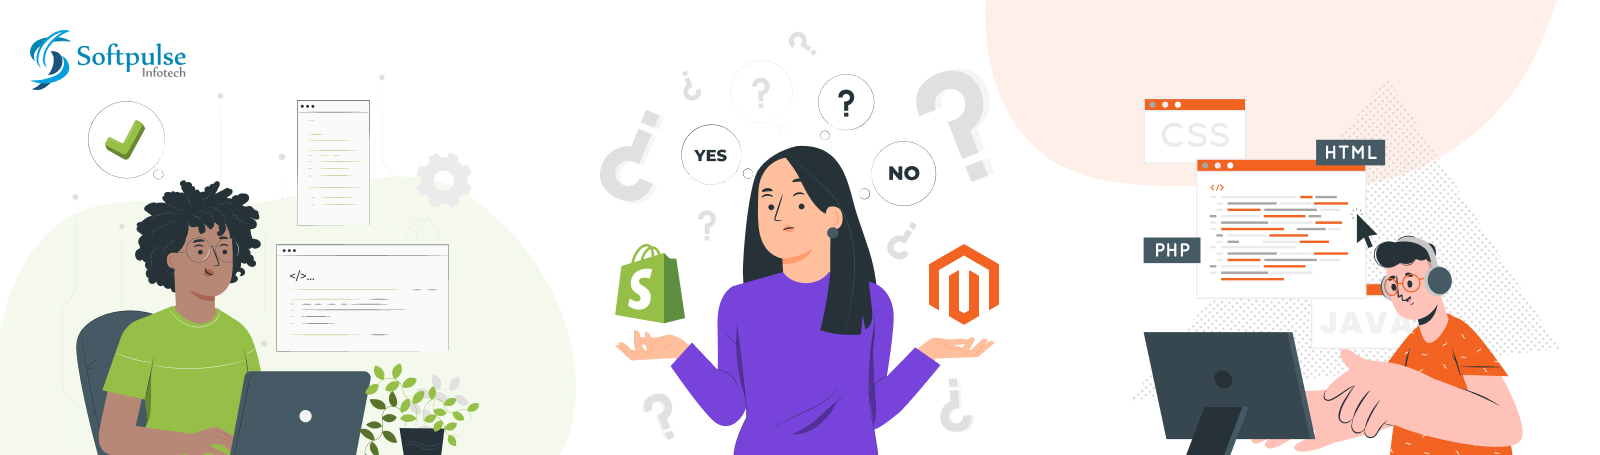 Magento vs Shopify? Compare and Make the Right Choice